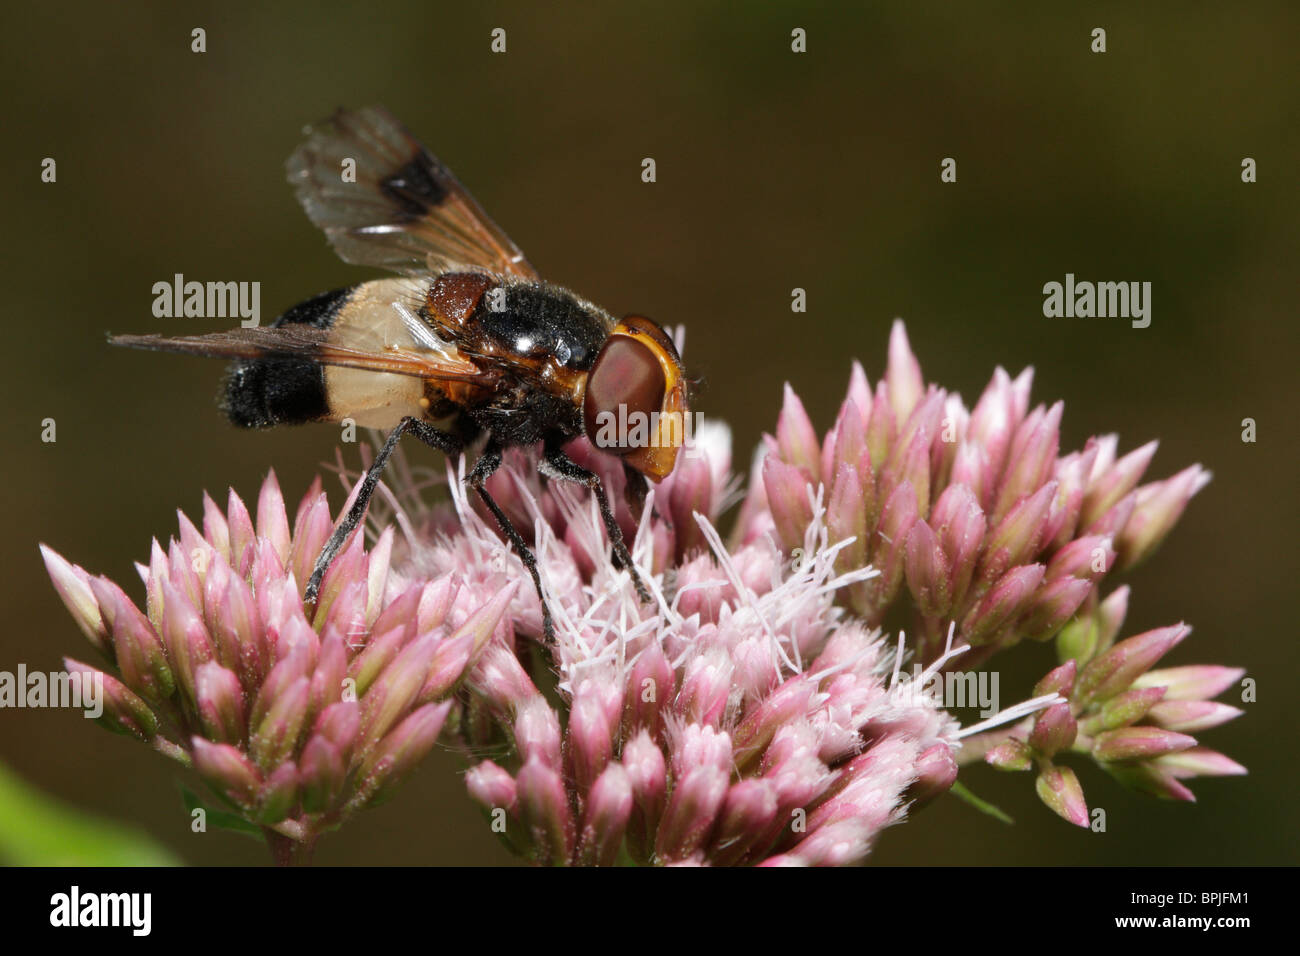 Volucella pellucens, a hoverfly Stock Photo